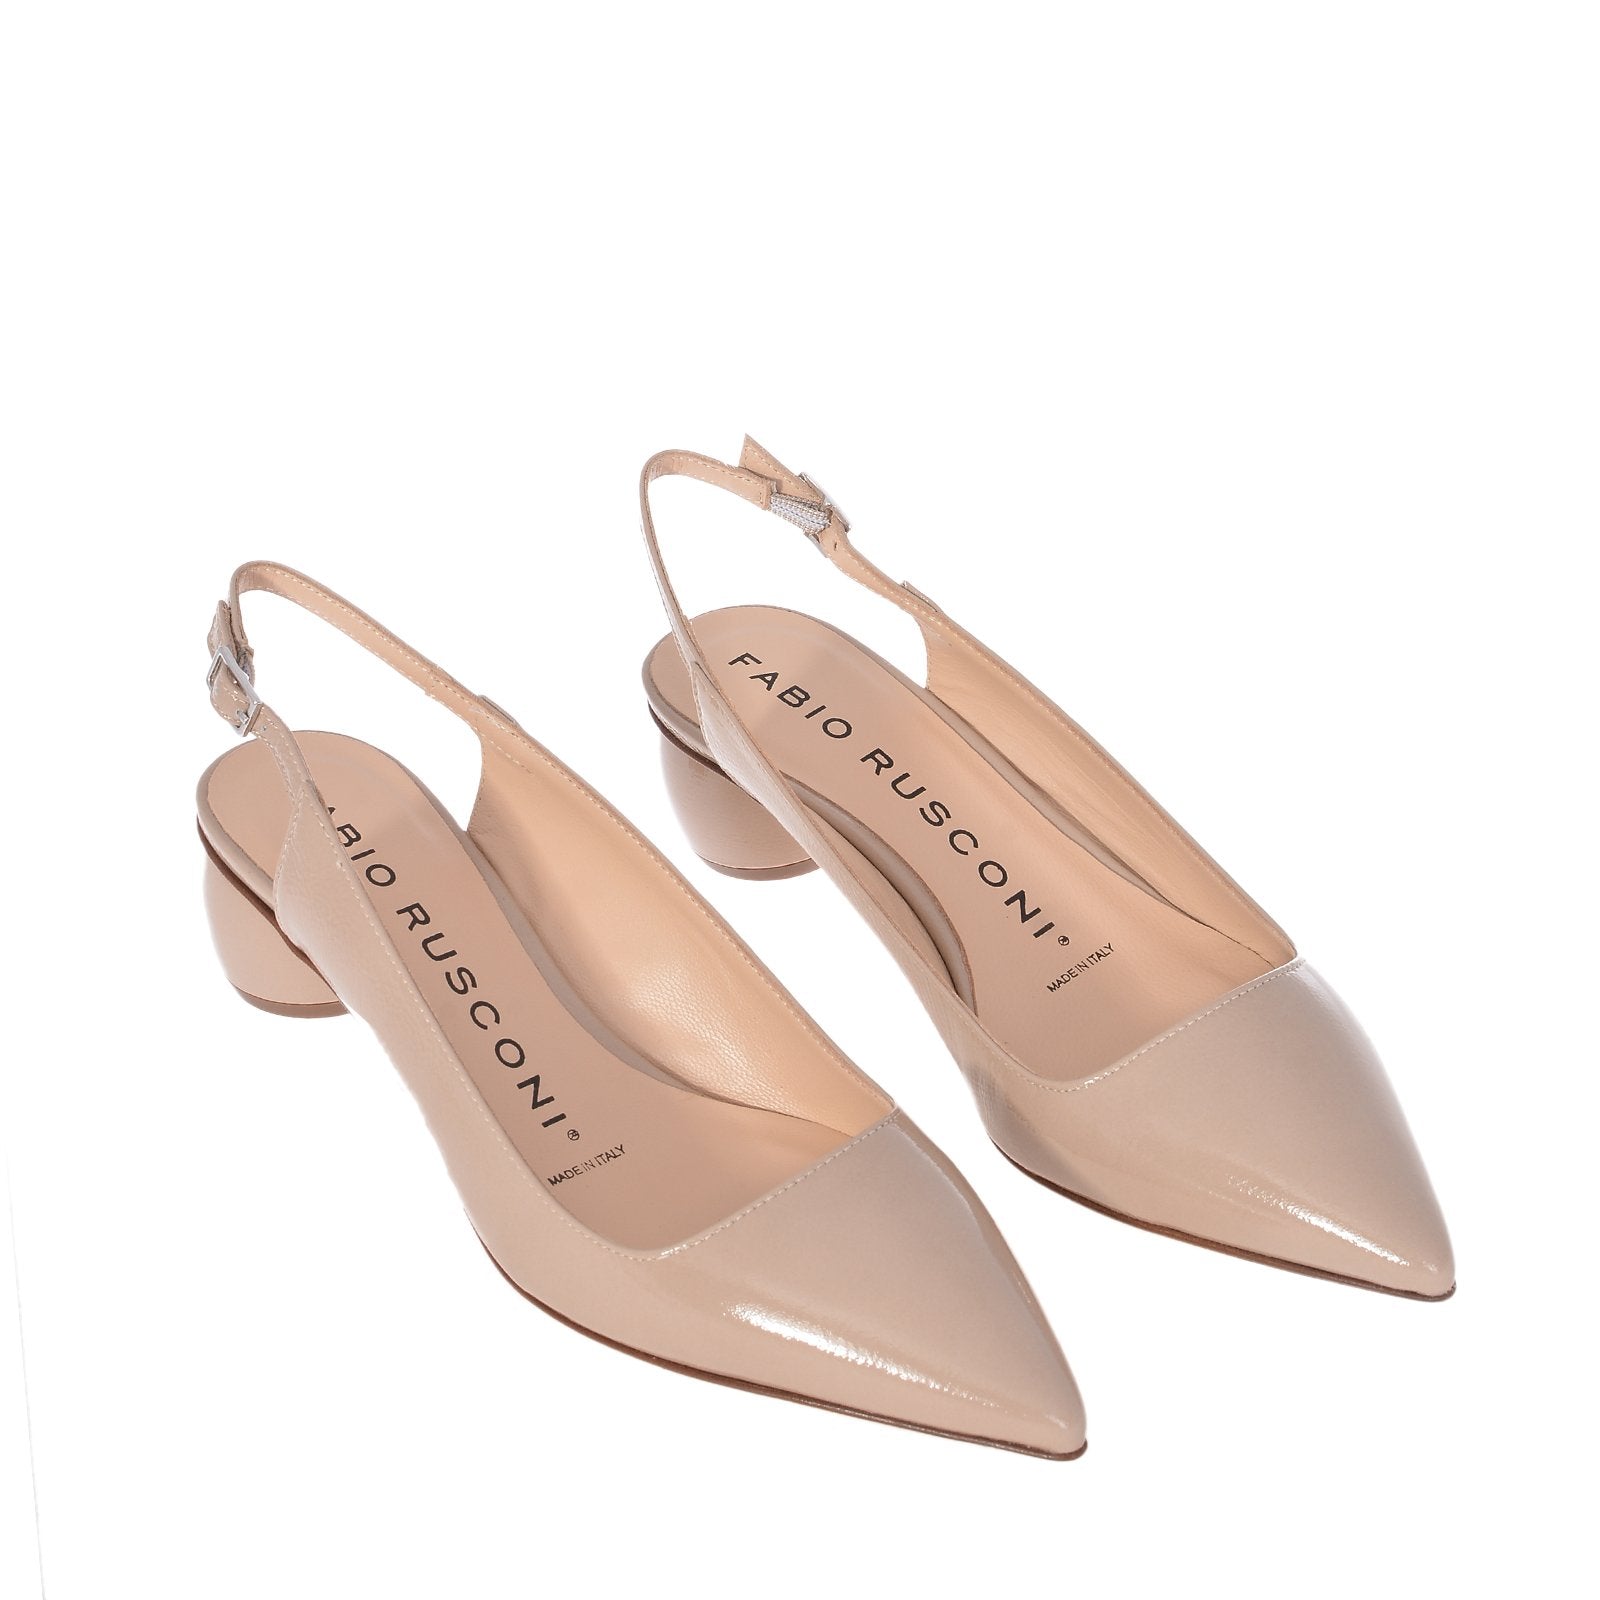 Naplak Leather Slingback Shoes In Nude Heels NUDE2382 - 3